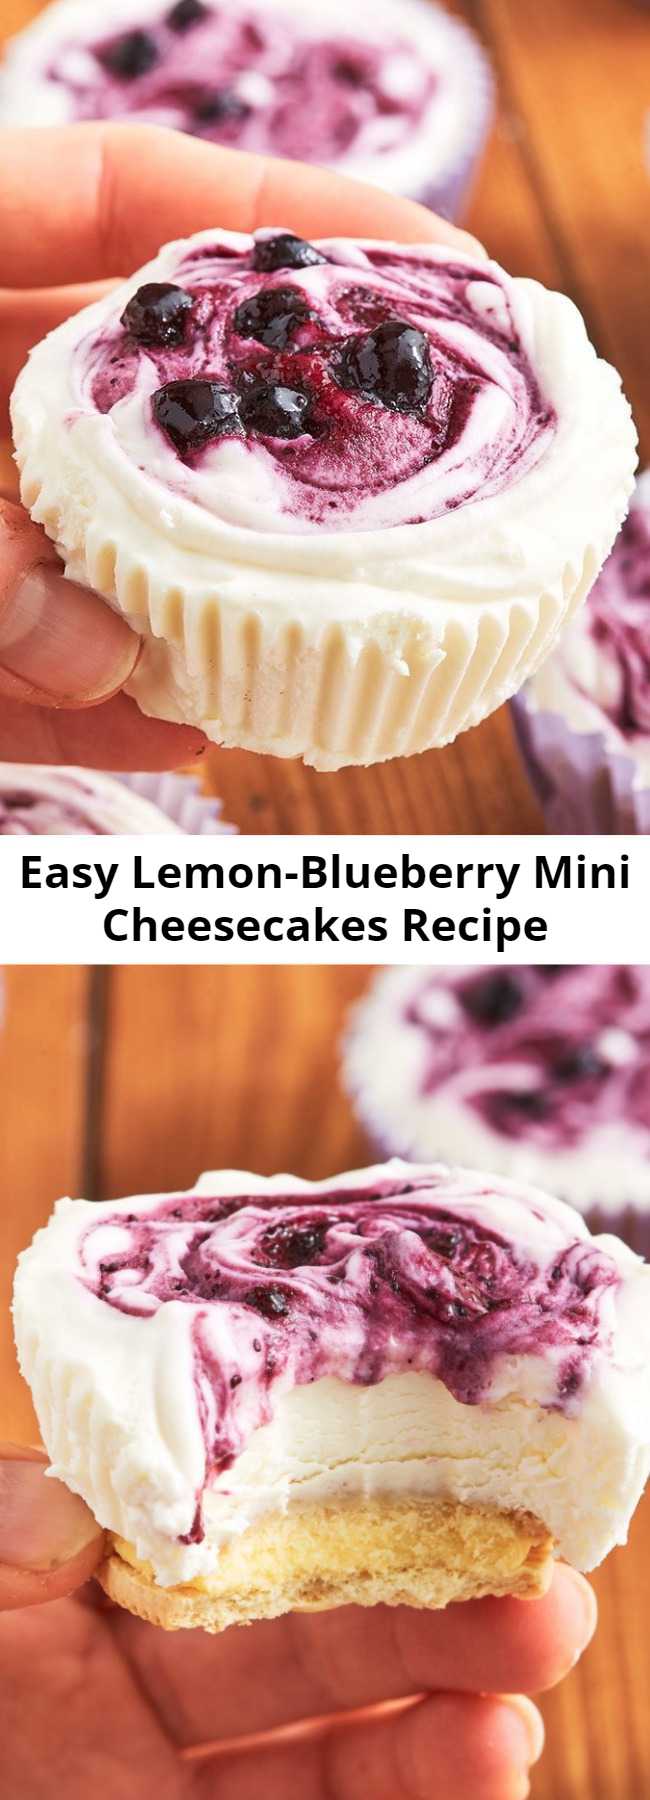 Easy Lemon-Blueberry Mini Cheesecakes Recipe - Mini cheesecakes, MASSIVE flavor. These Lemon Blueberry Mini Cheesecakes are the perfect tiny dessert to satisfy your sweet tooth without going overboard. #lemon #blueberry #lemonblueberry #cheesecakes #minidesserts #cheesecakedesserts #partydesserts